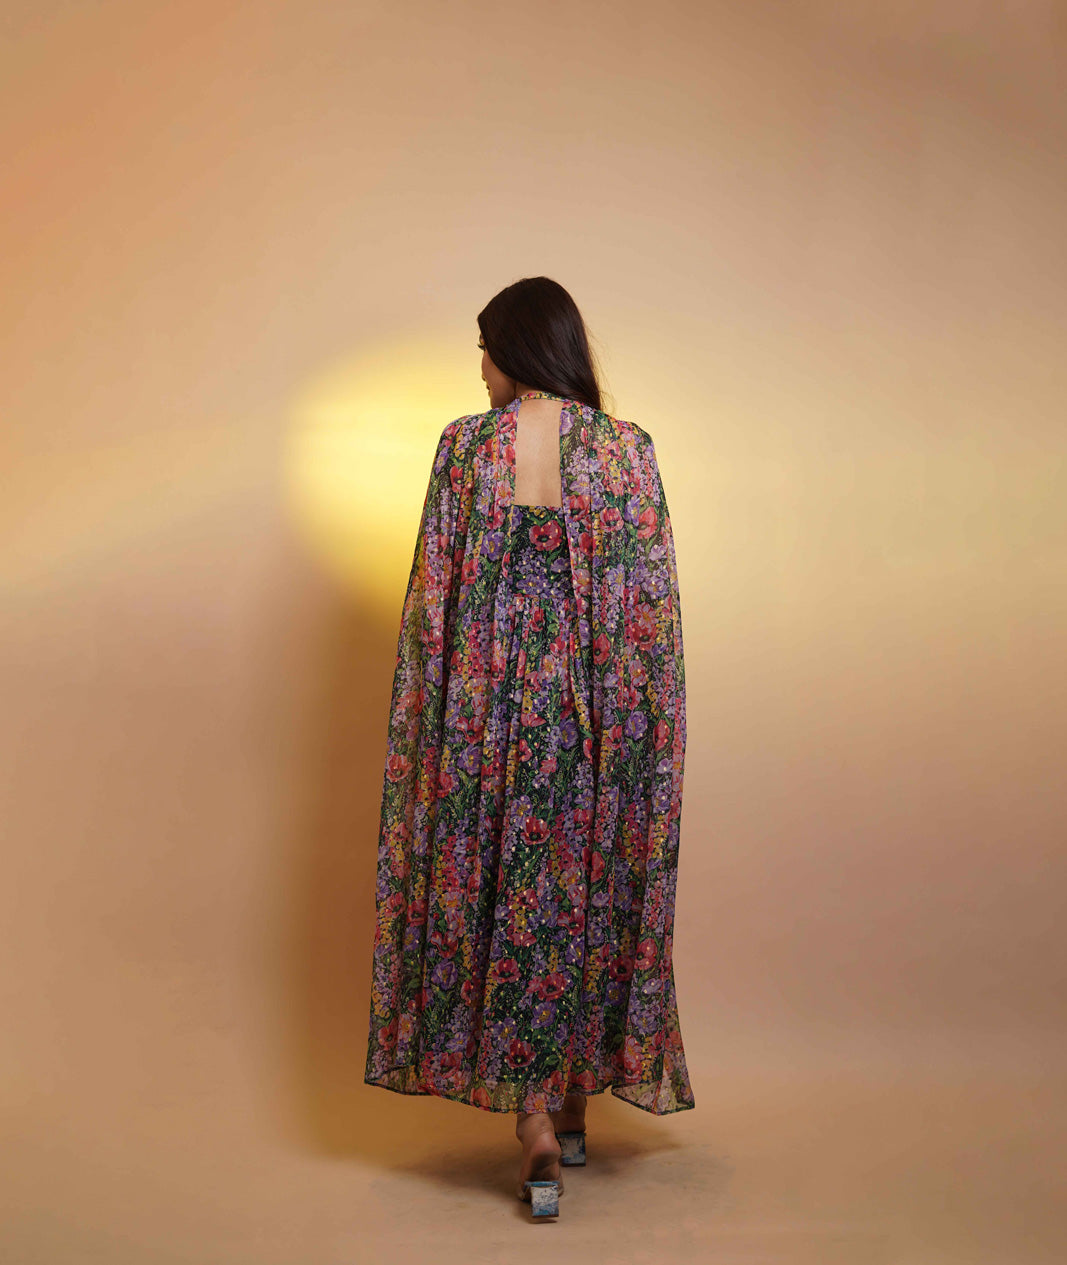 Positano Floral Cape and Maxi Dress Womens Party Co-ord Set